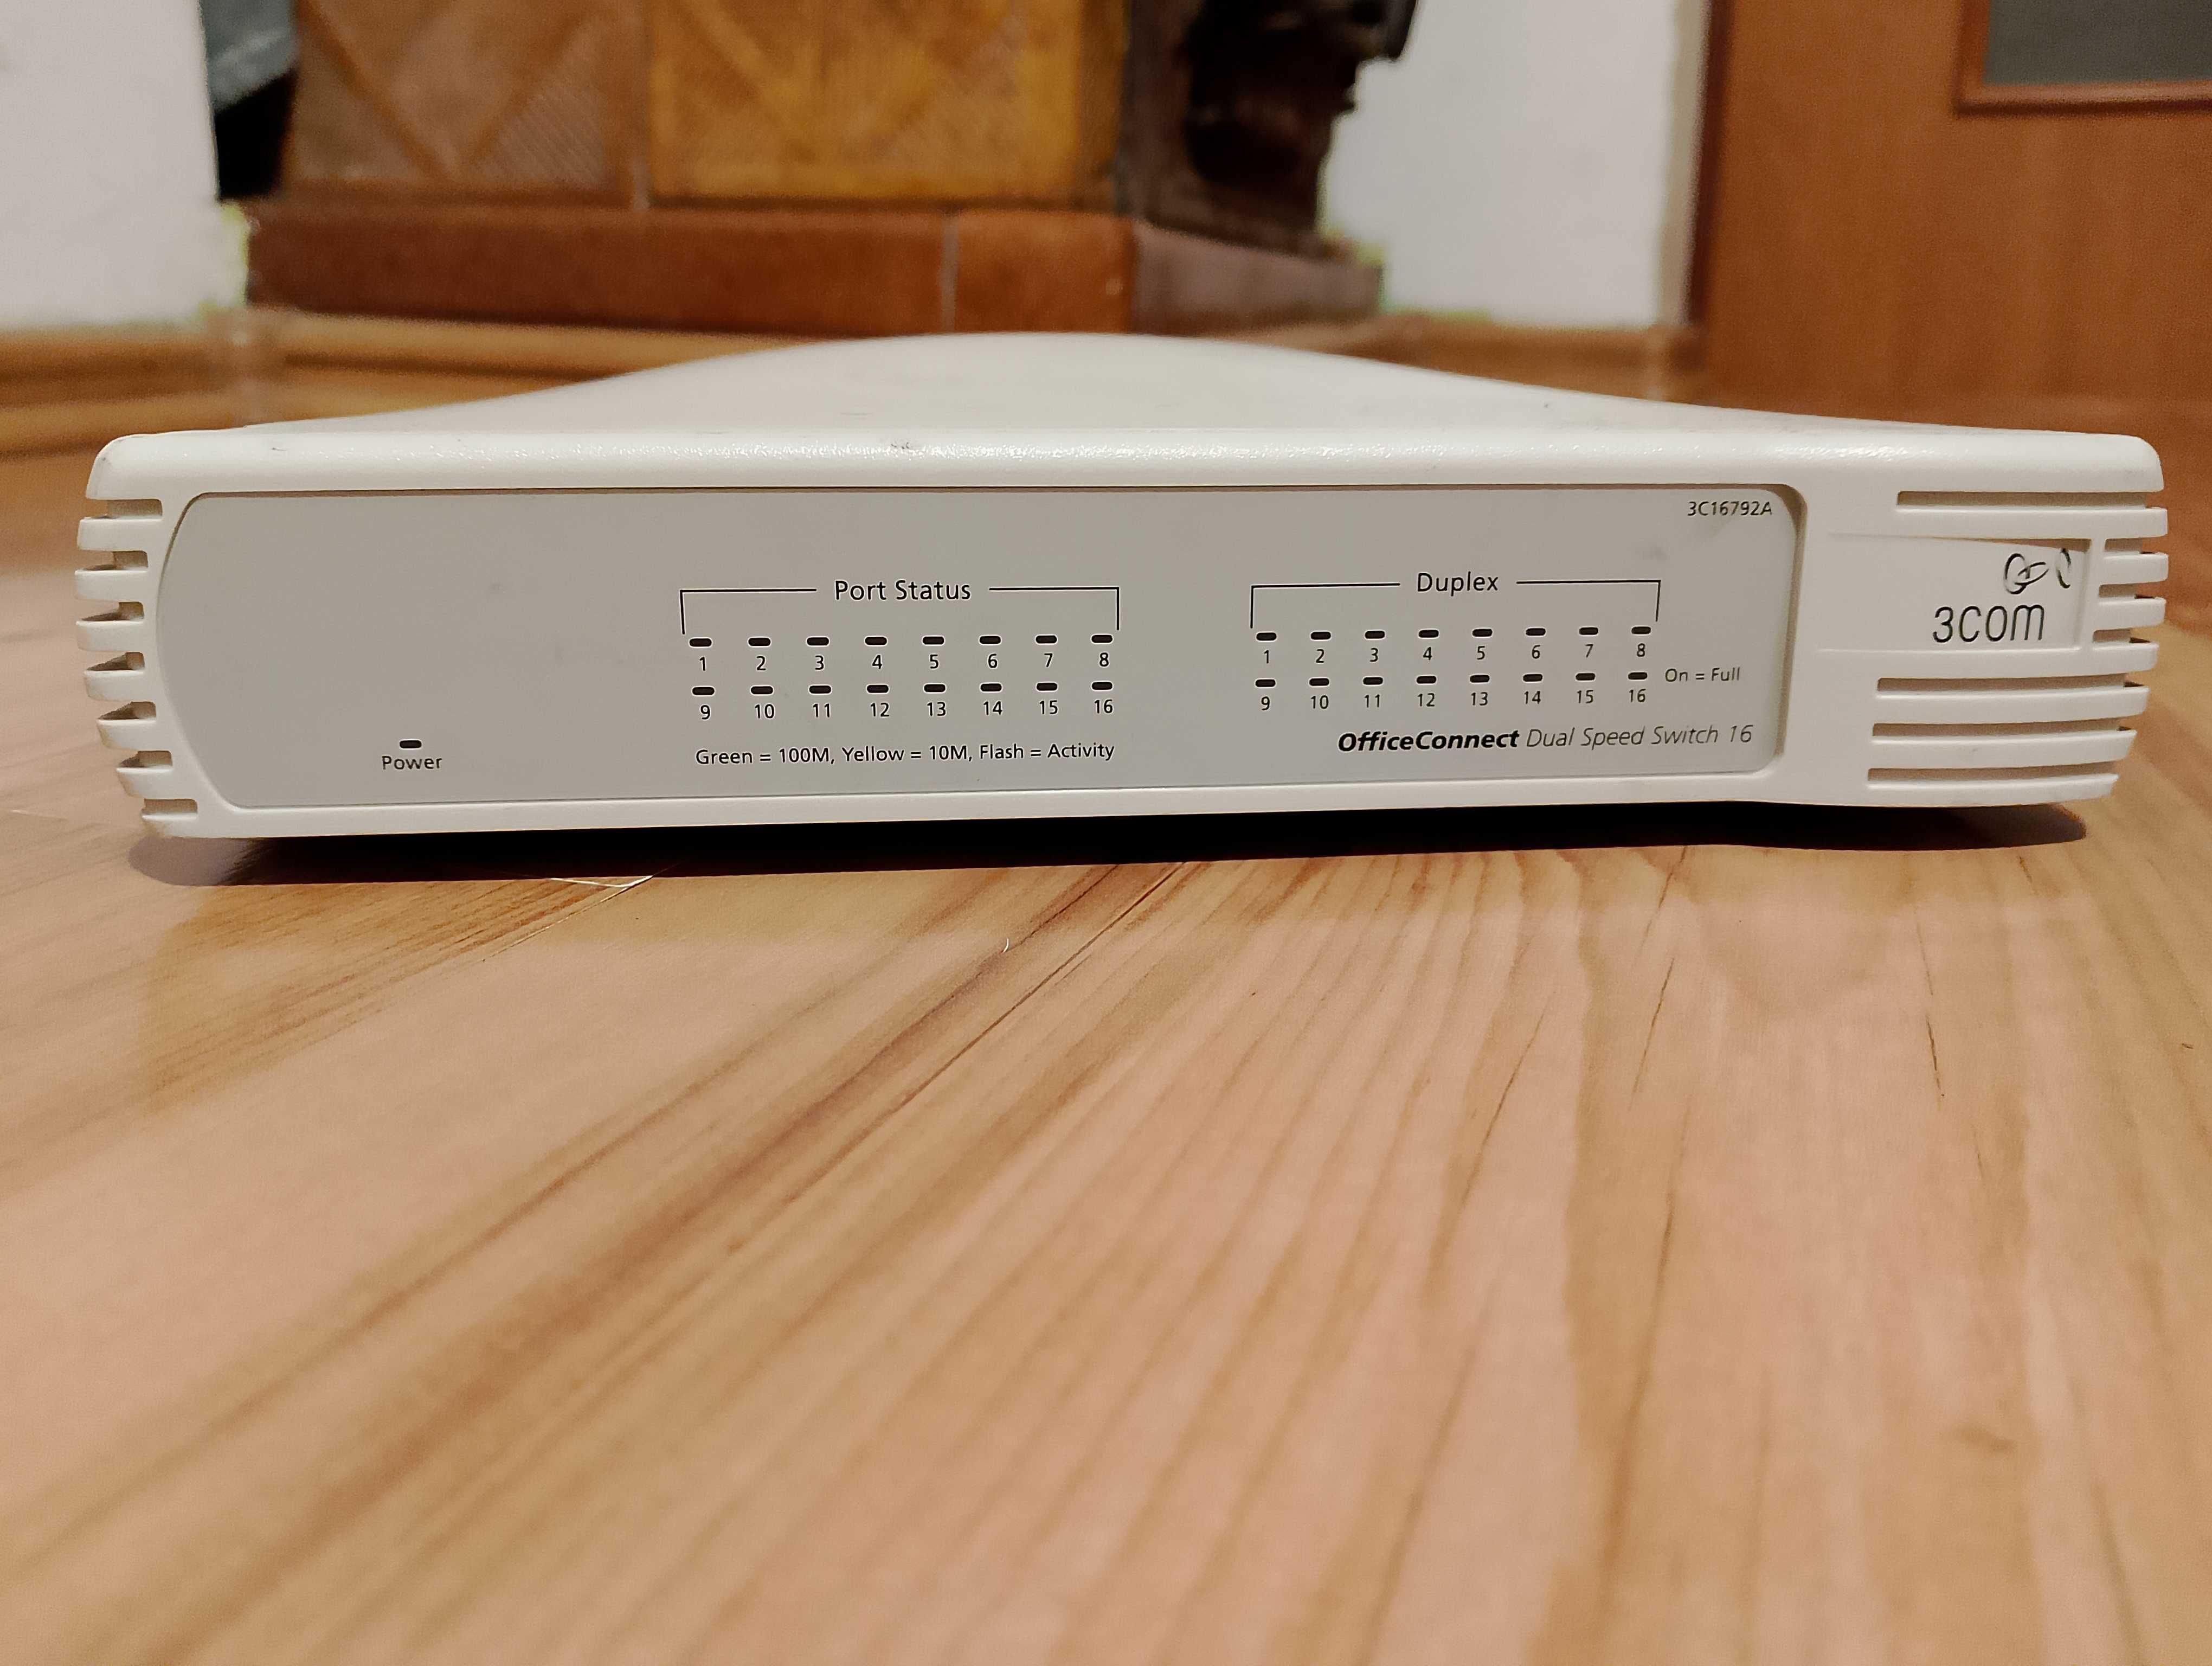 3COM officeConnect dual speed switch 16